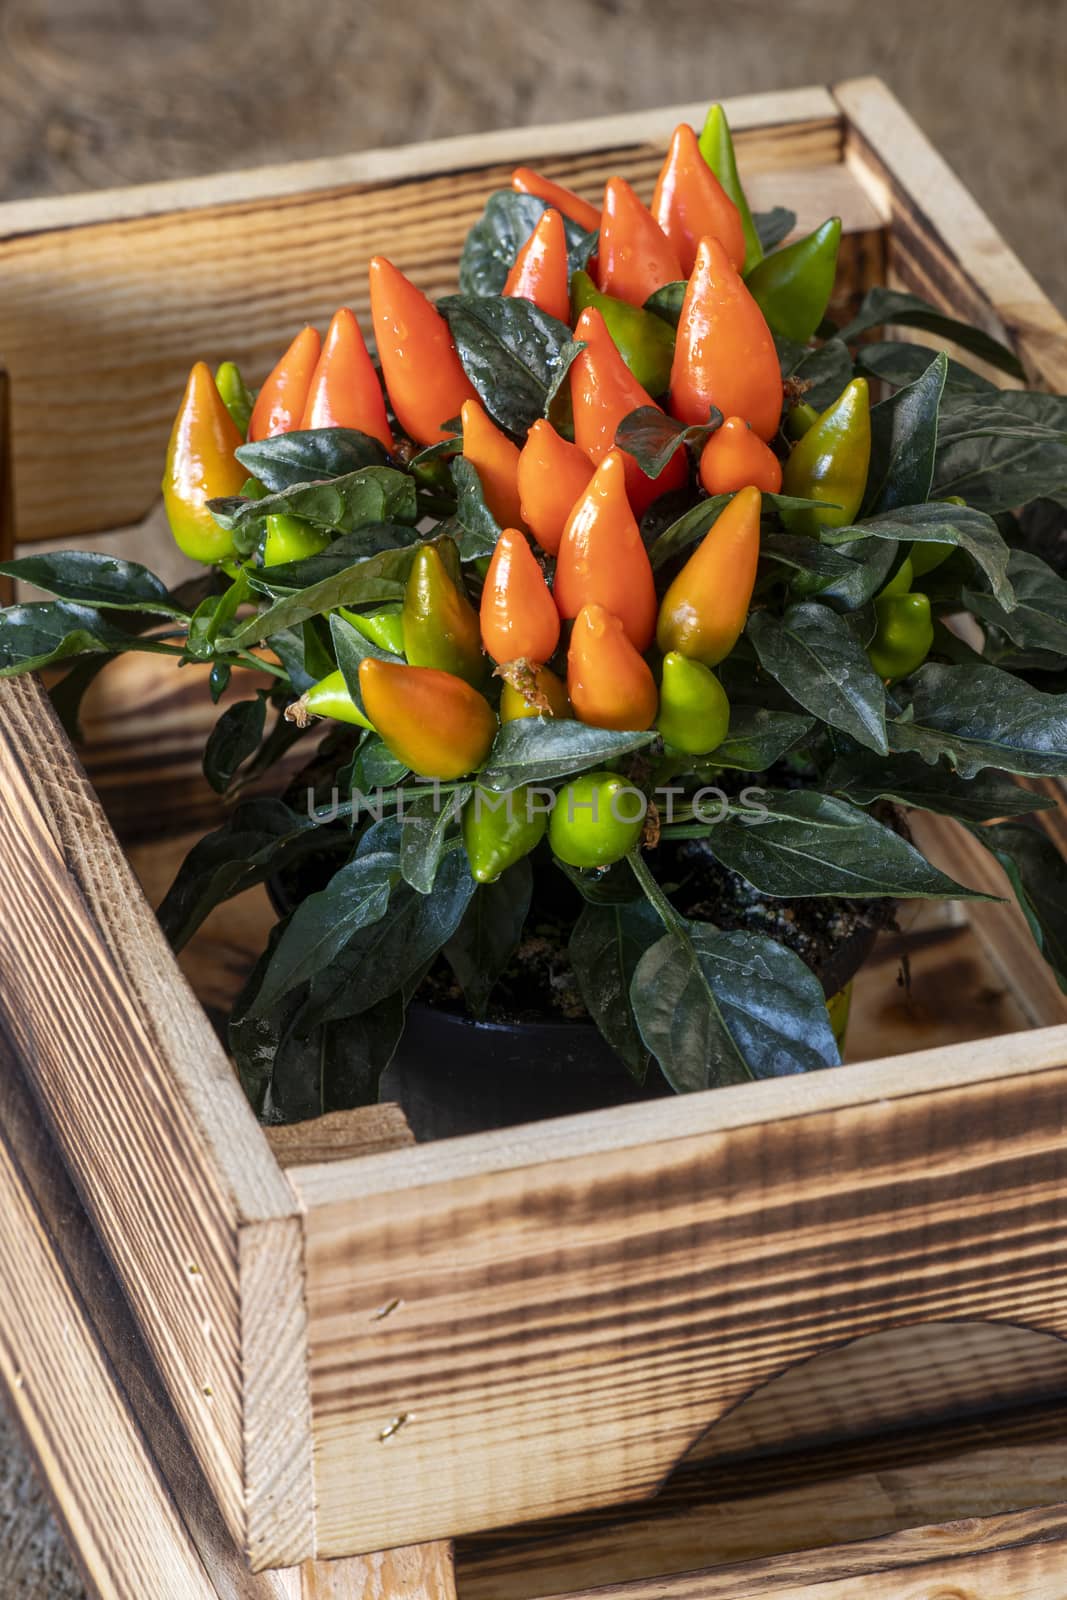 chilis in a wooden box